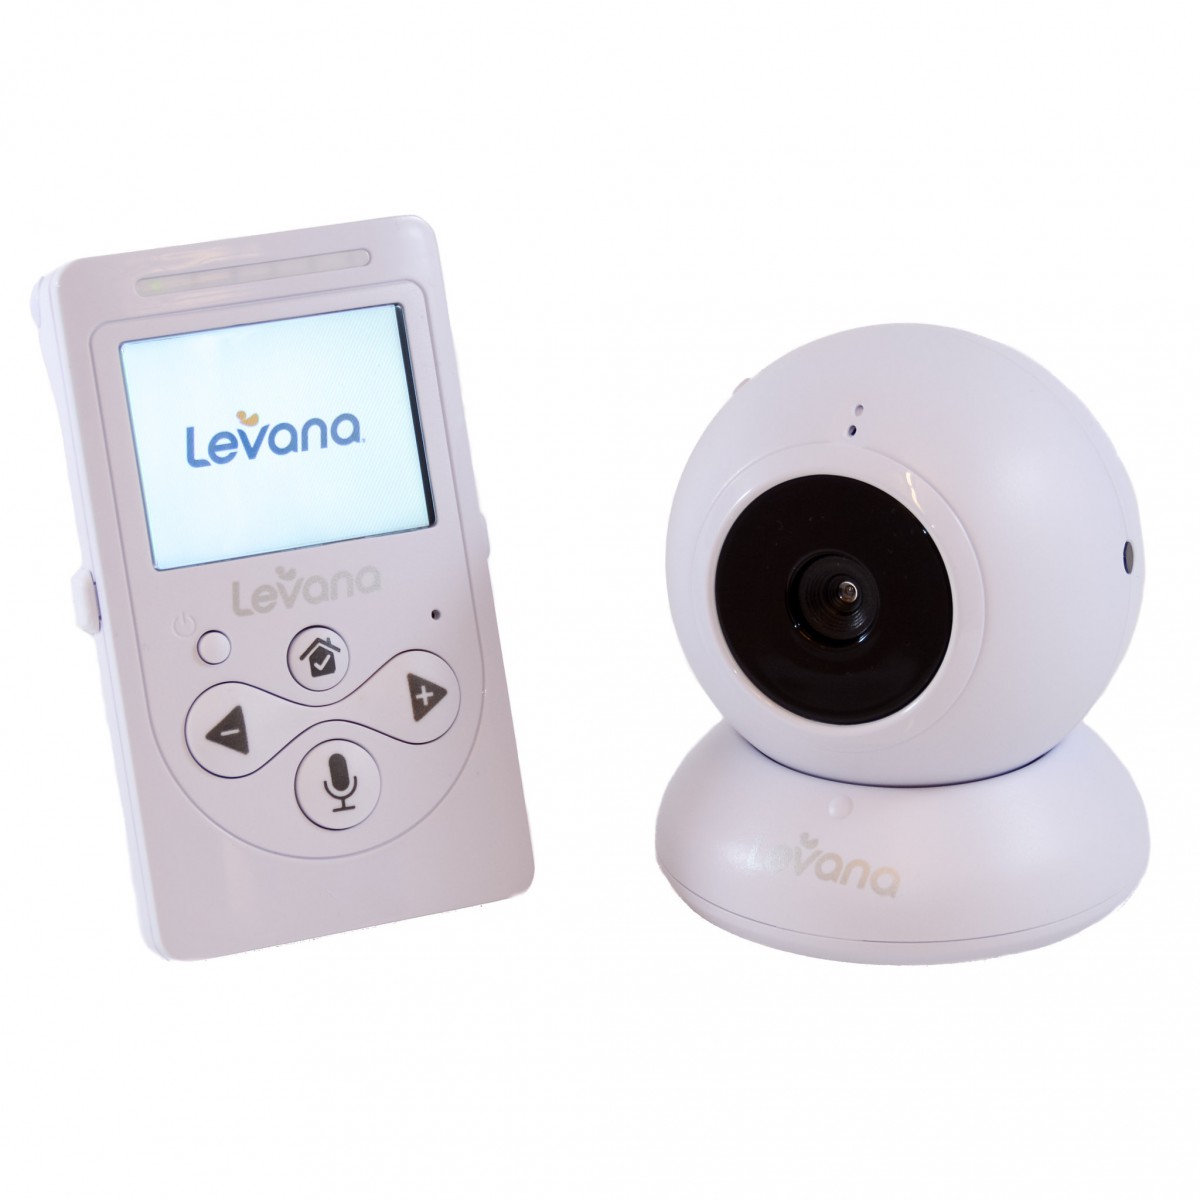 levana lila video monitor review